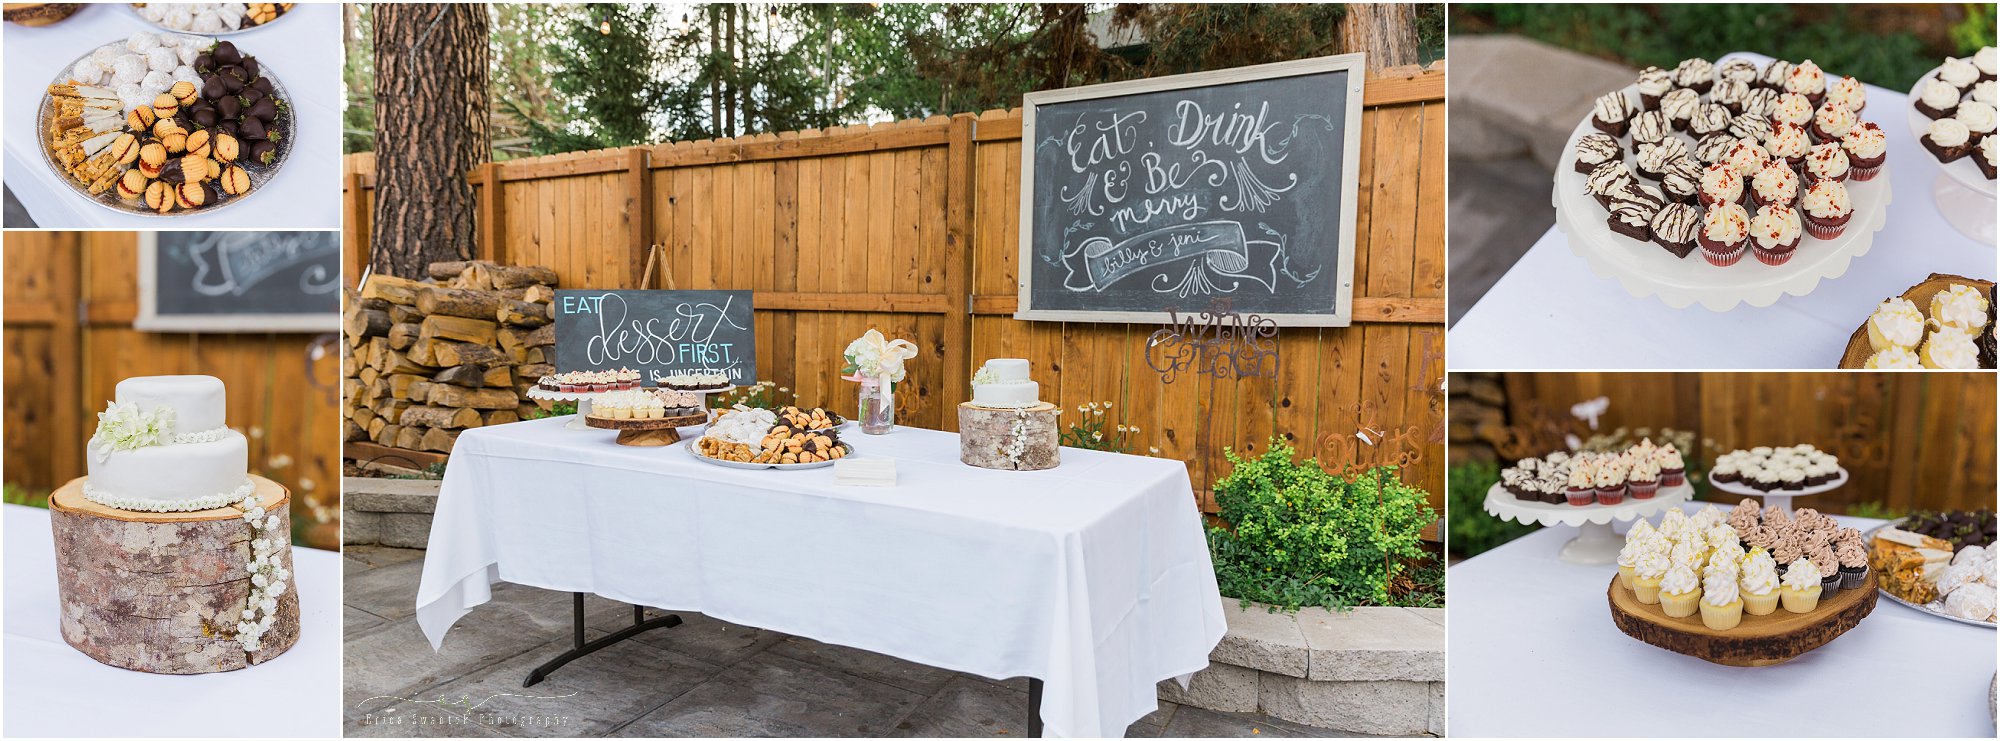 A gorgeous sweetheart cake and dessert bar at this outdoor wedding reception in Sisters, OR. | Erica Swantek Photography